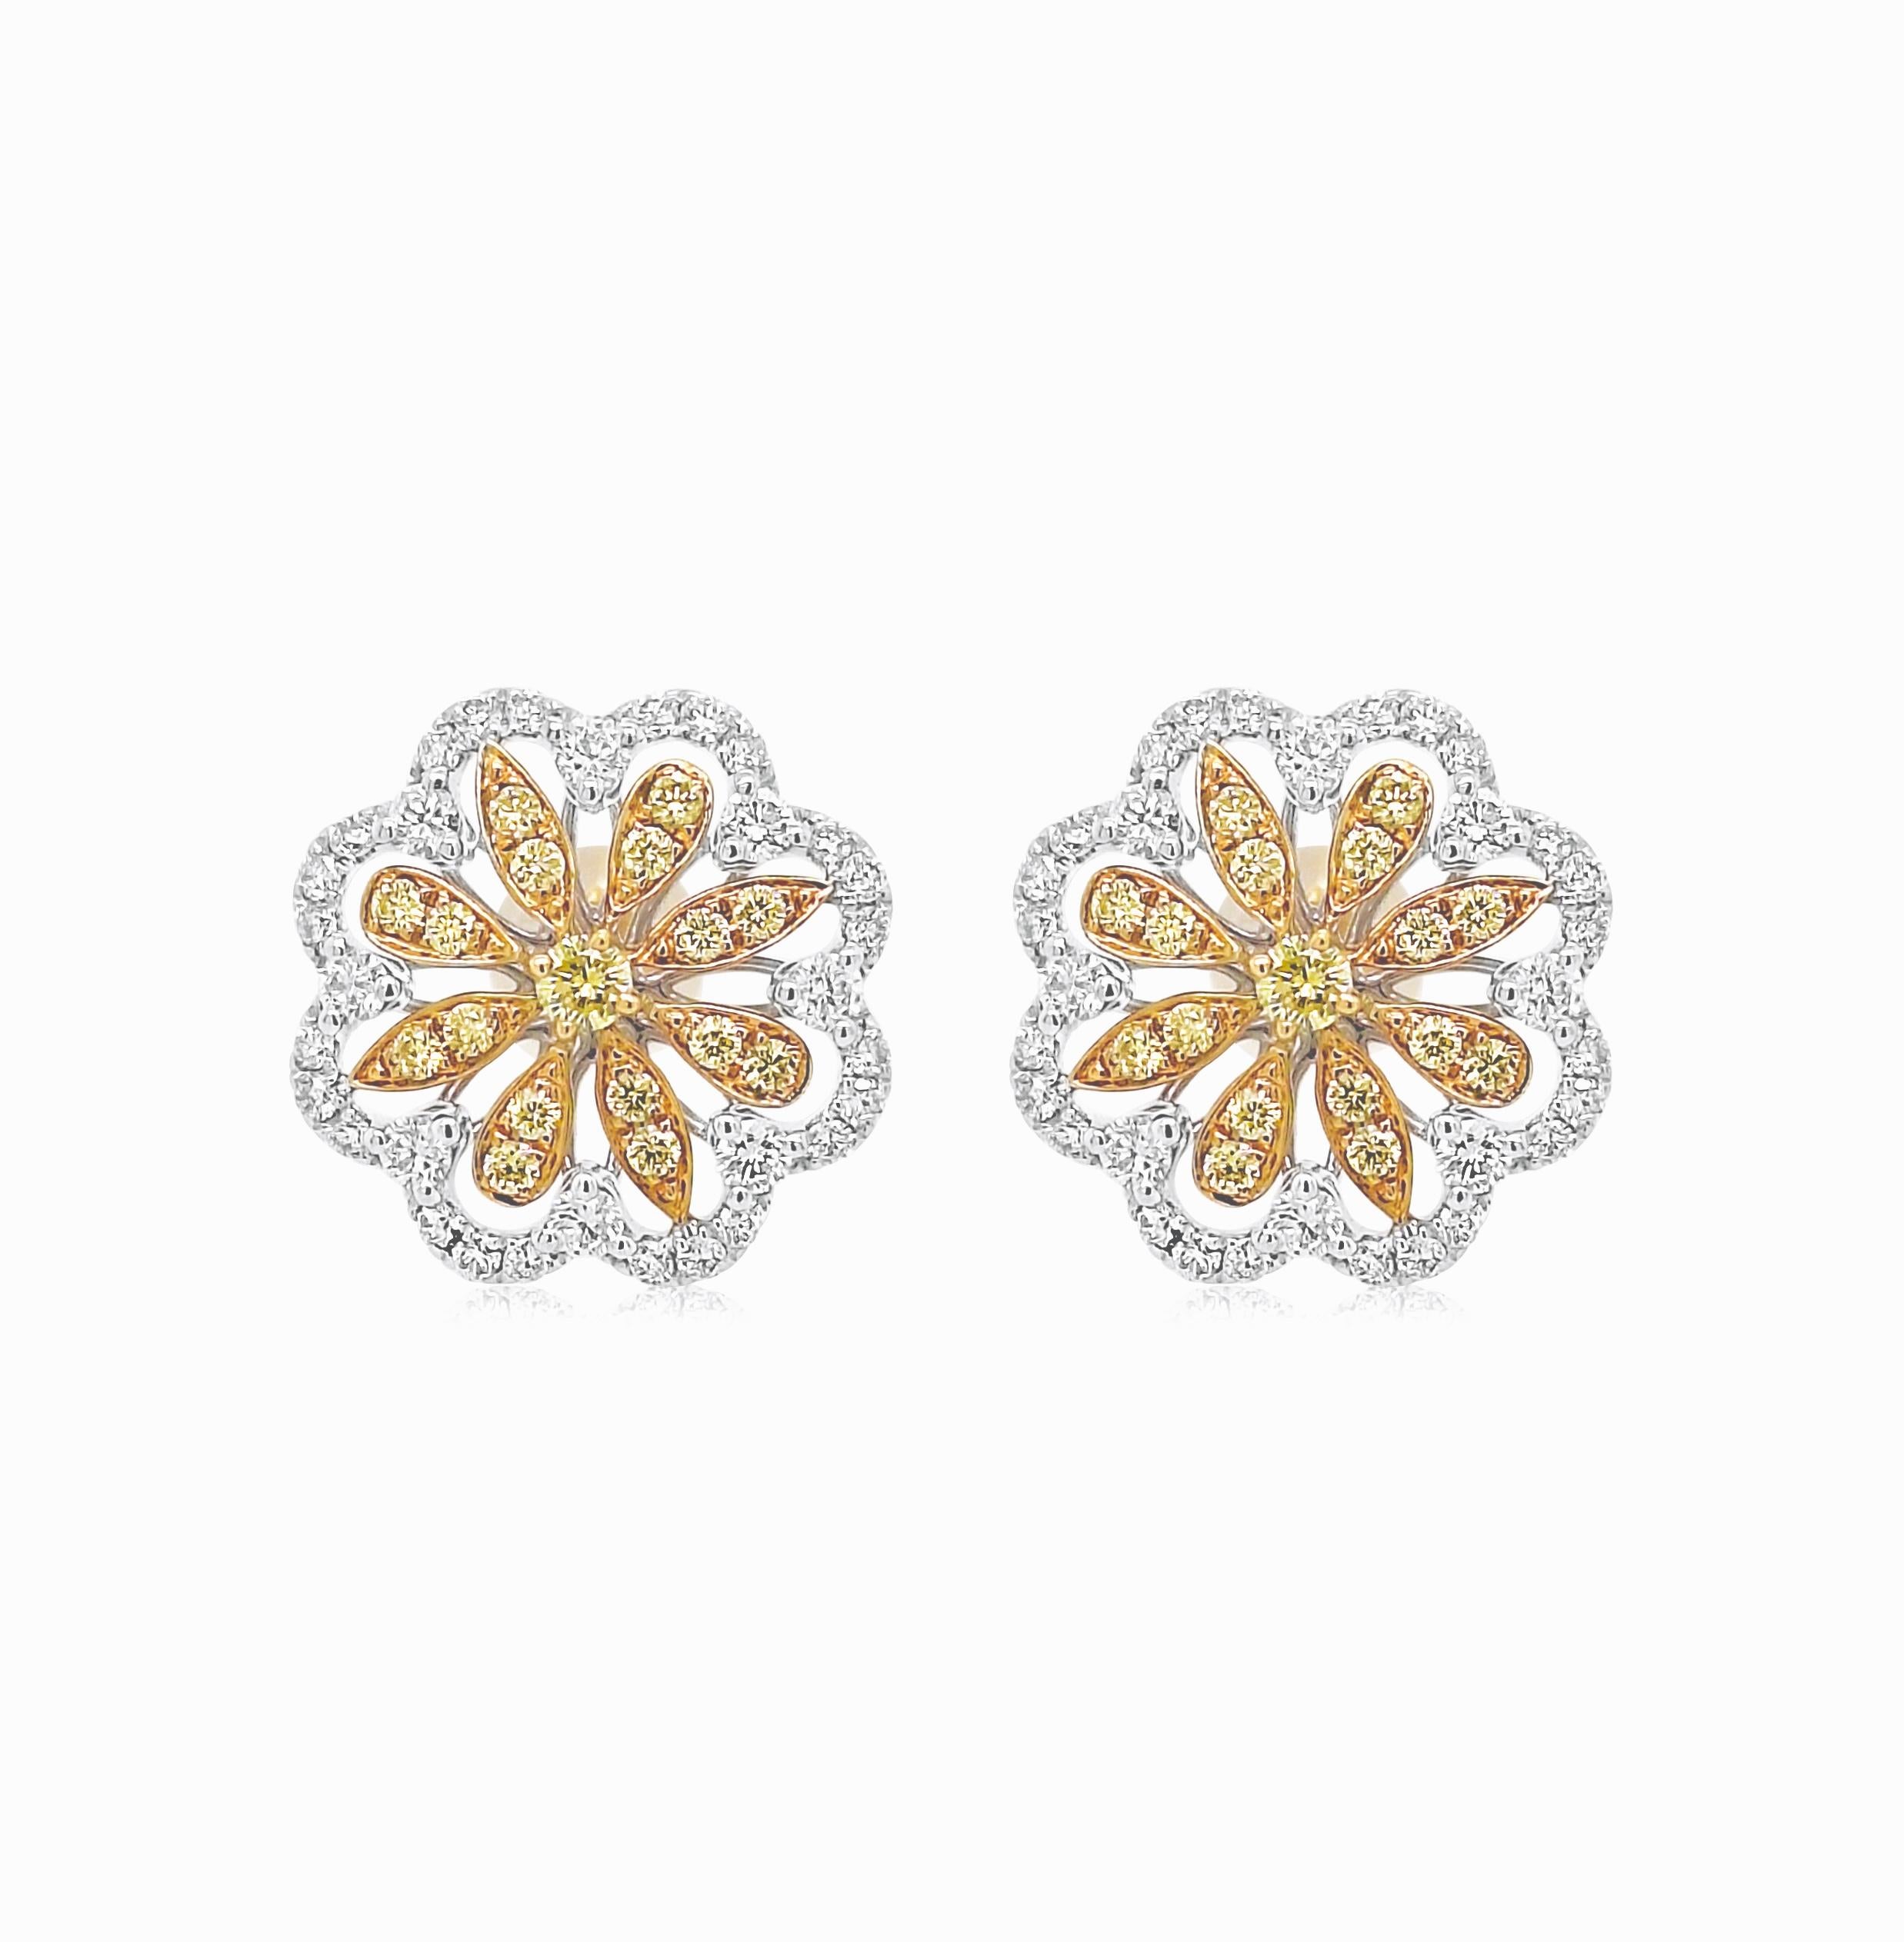 Designer Earrings with Natural Fancy Yellow diamonds and White diamonds, radiating charm and magnificence.

Natural Yellow Diamond - 0.34 cts
White diamond - 0.66 cts
PT 900

HYT Jewelry is a privately owned company headquartered in Hong Kong, with